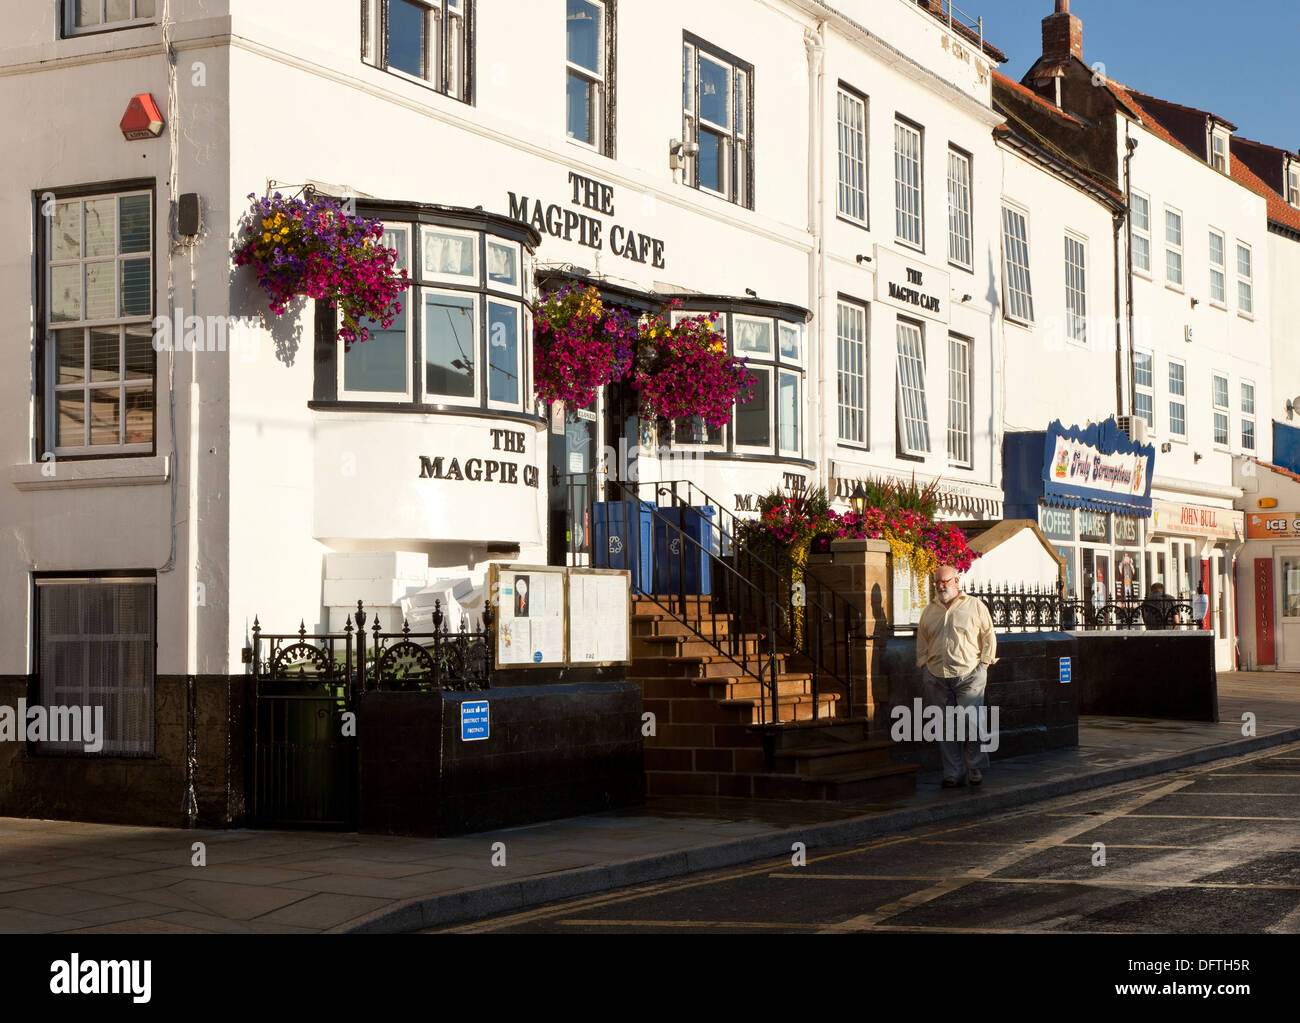 A man walking past the Magpie Cafe in Whitby in Yorkshire England Stock Photo